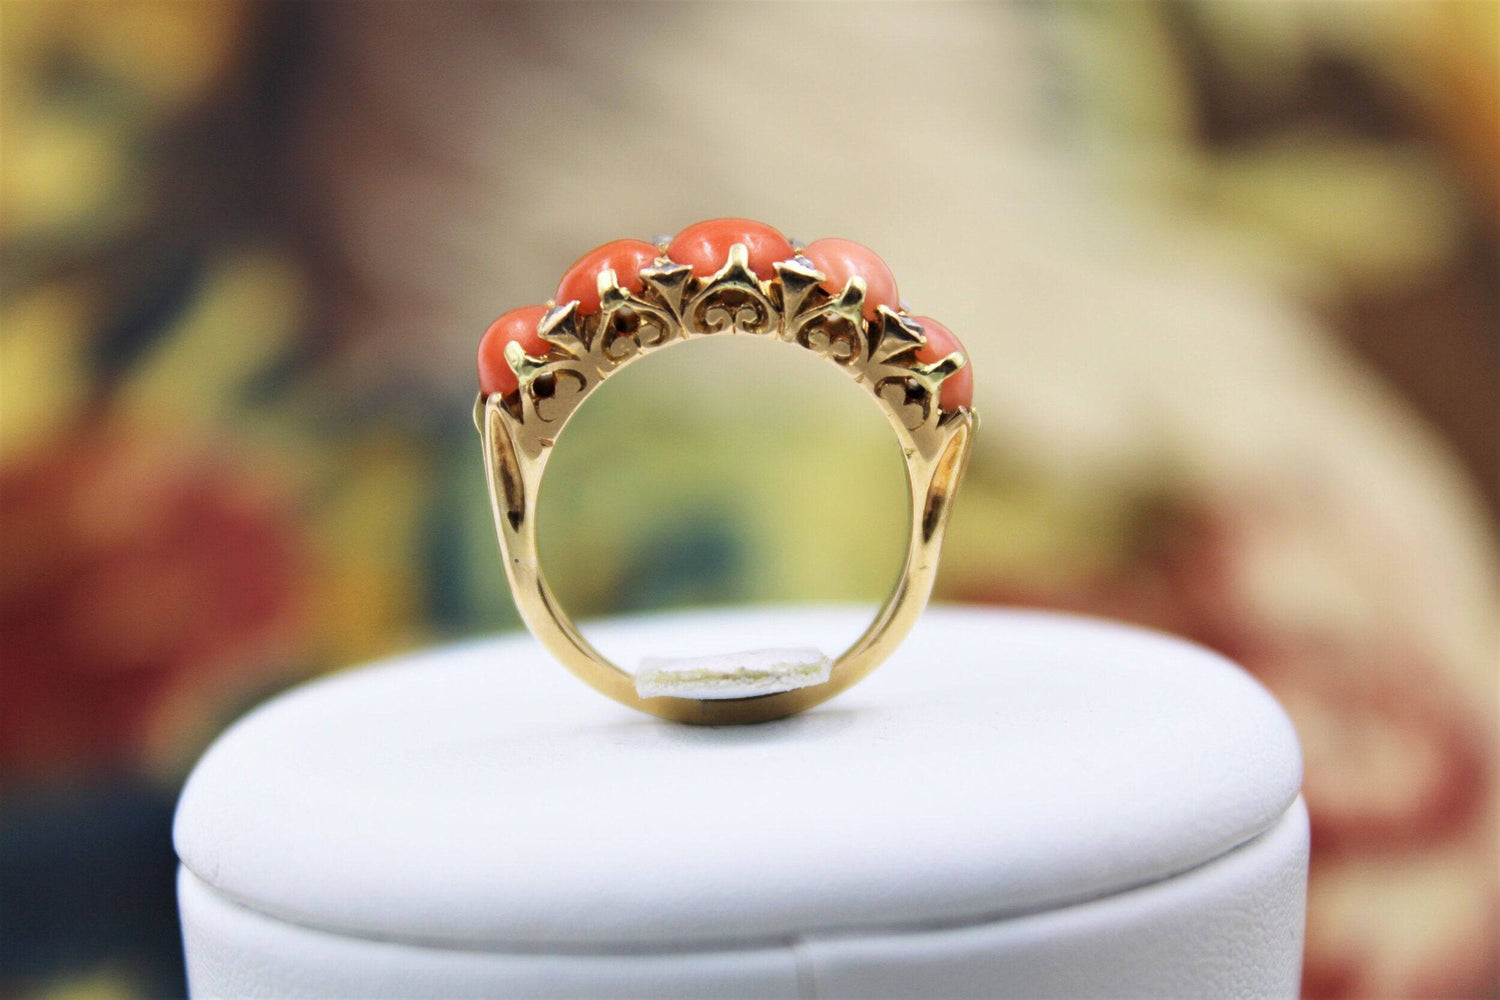 A very fine Victorian Coral and Diamond Ring set in 18ct Yellow Gold, English, Circa 1900 - Robin Haydock Antiques